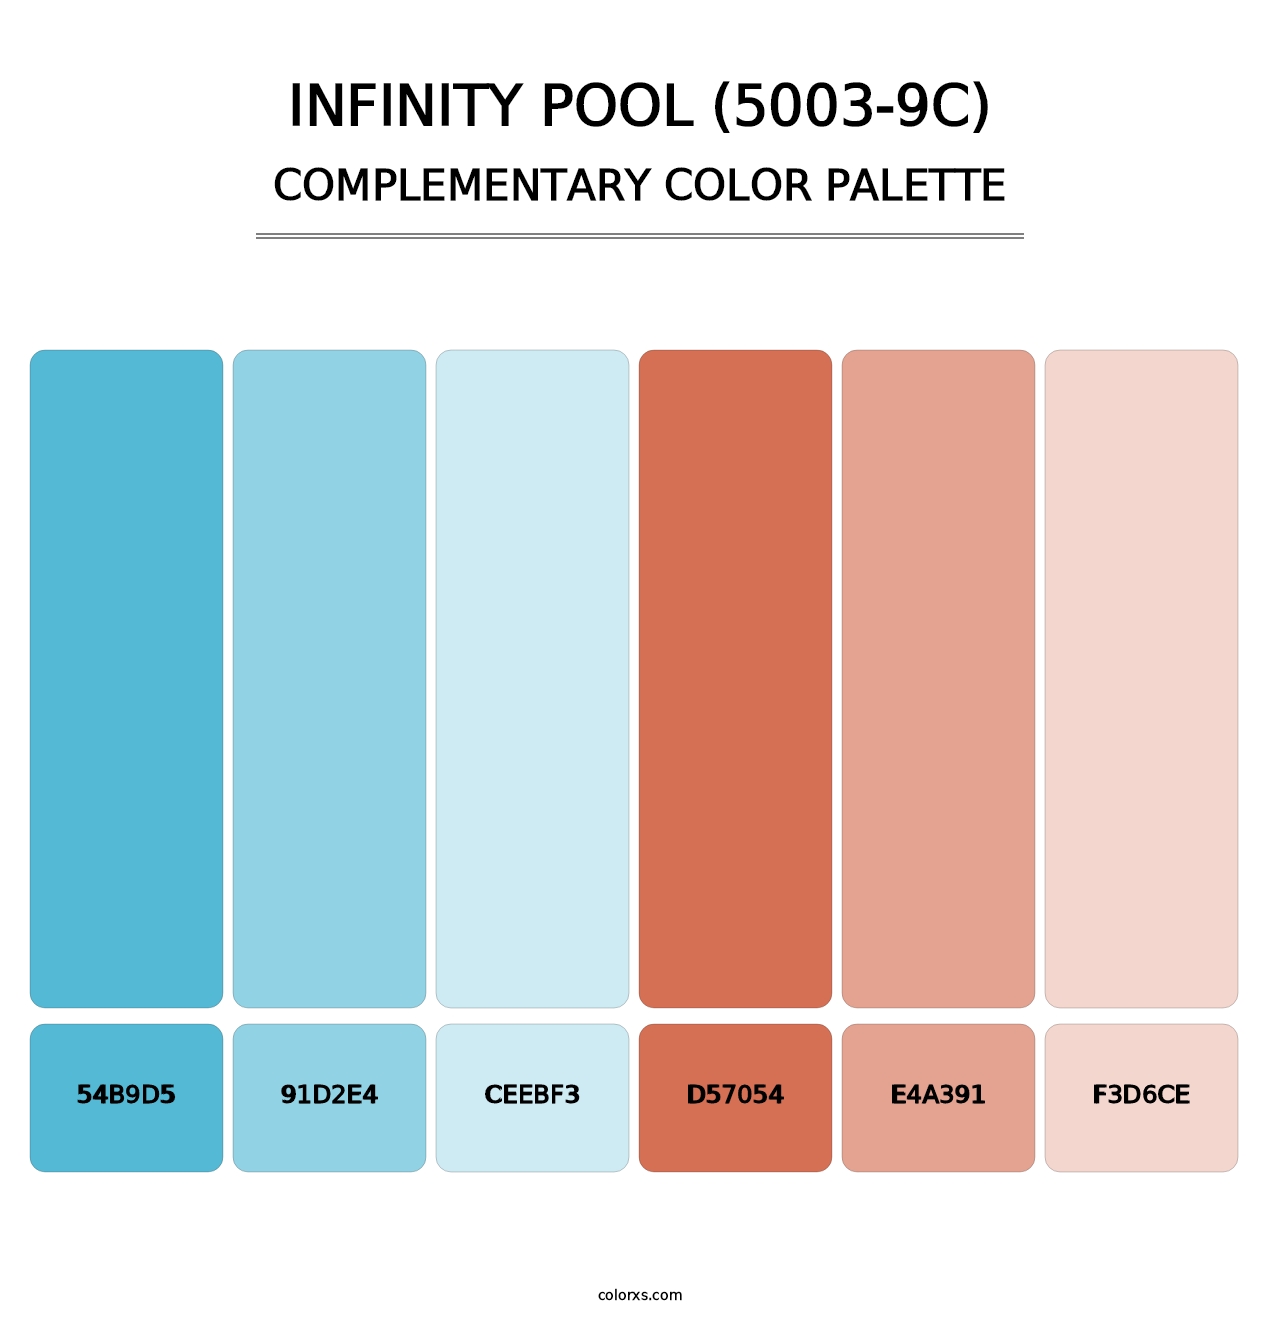 Infinity Pool (5003-9C) - Complementary Color Palette